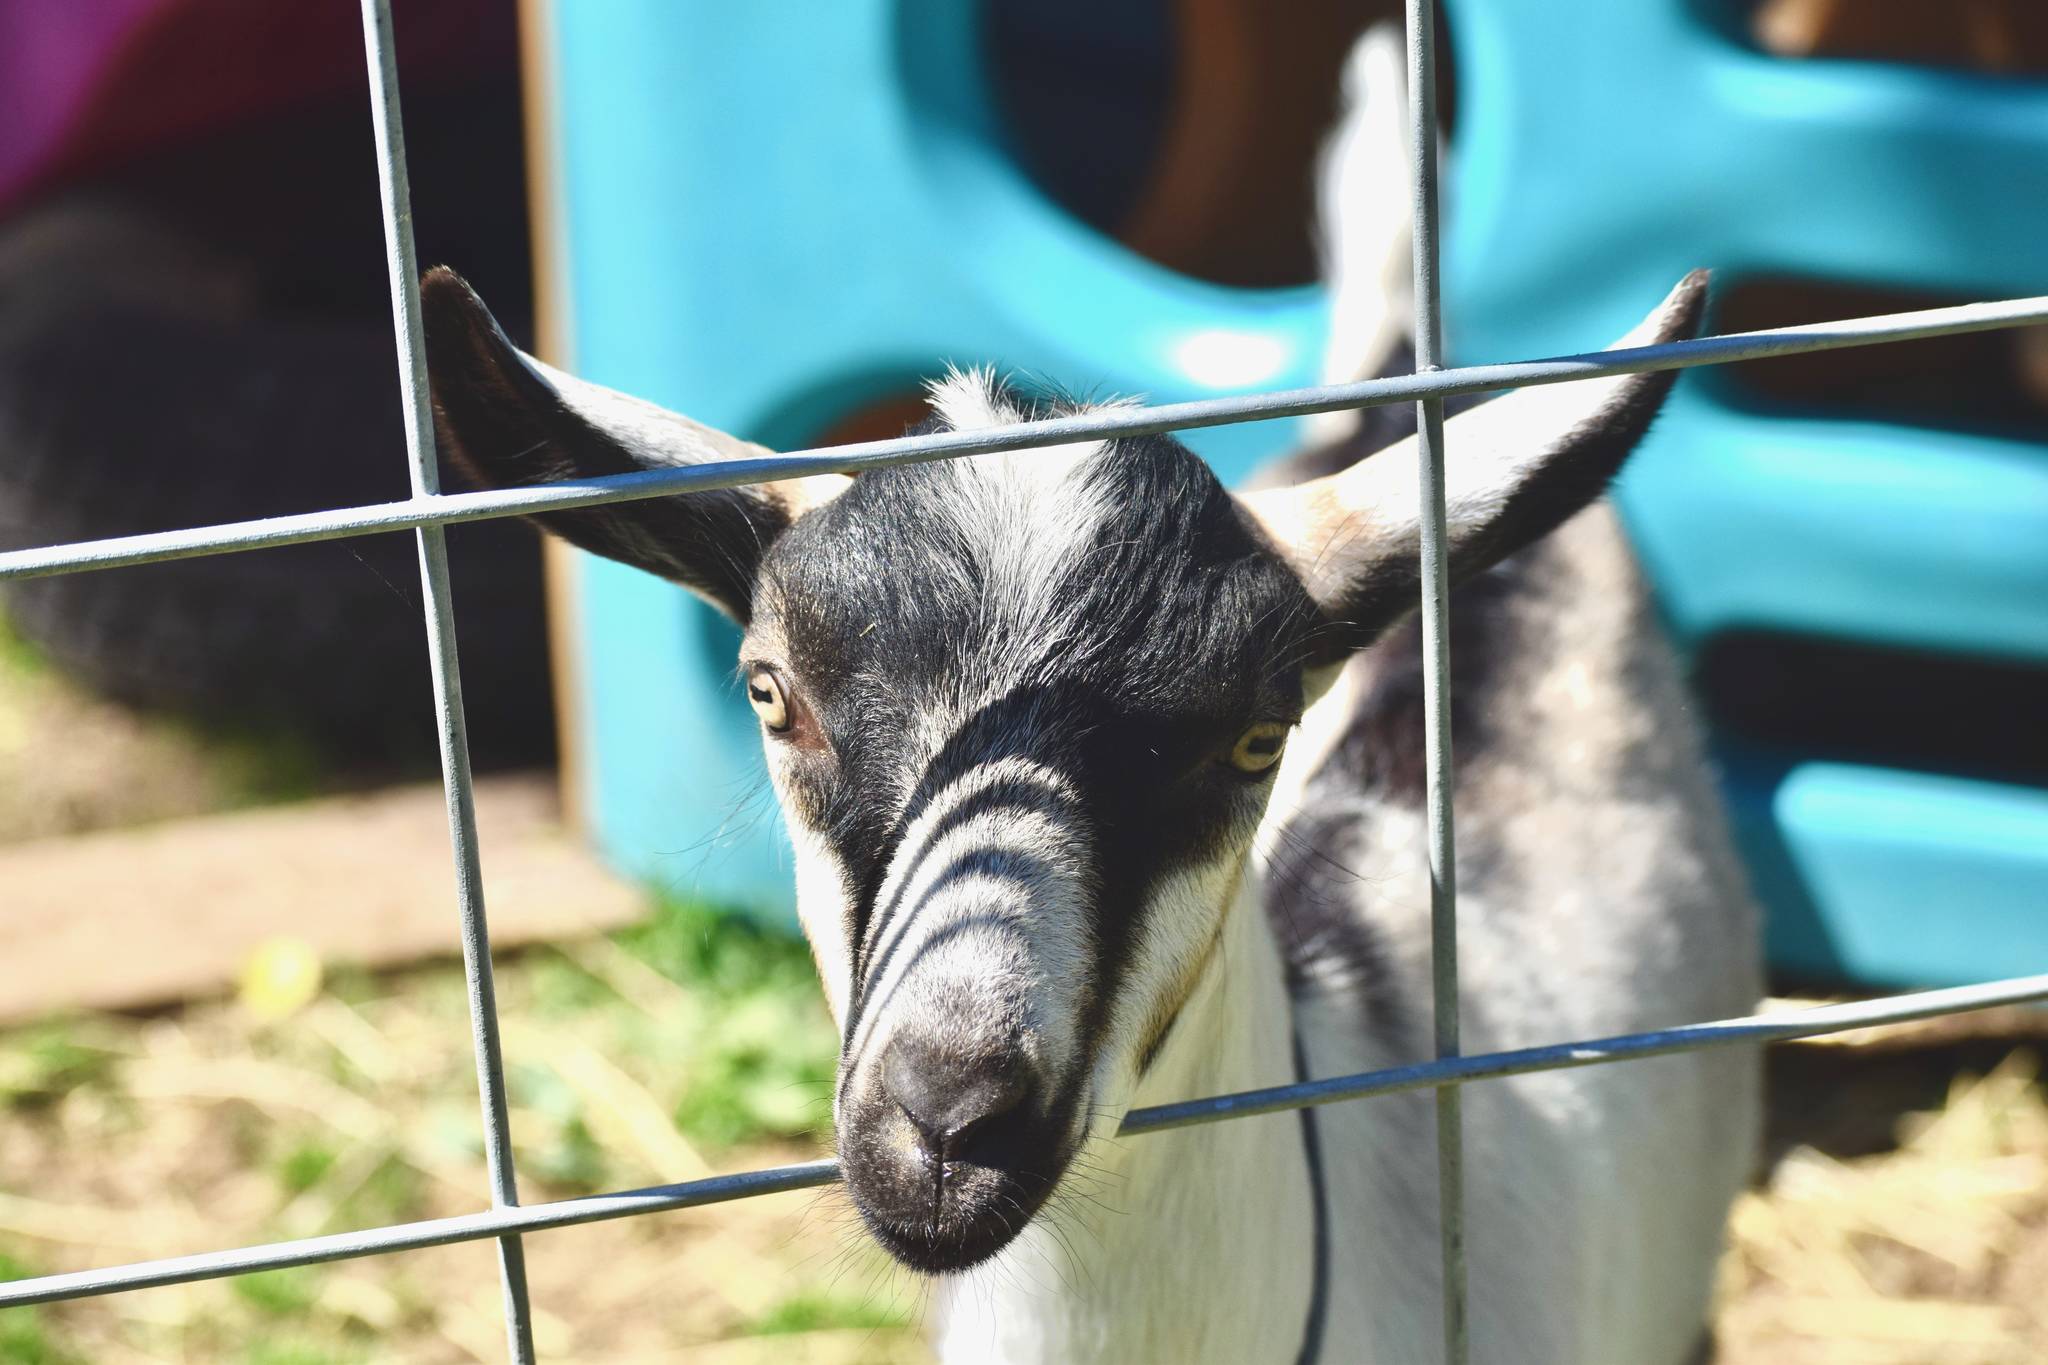 Arthur, one of Deanna O’Connor’s 11 goats pokes his head out of his pen at O’Connor’s home in Nikiski, Alaska on Tuesday, July 3, 2018. (Photo by Victoria Petersen/Peninsula Clarion)